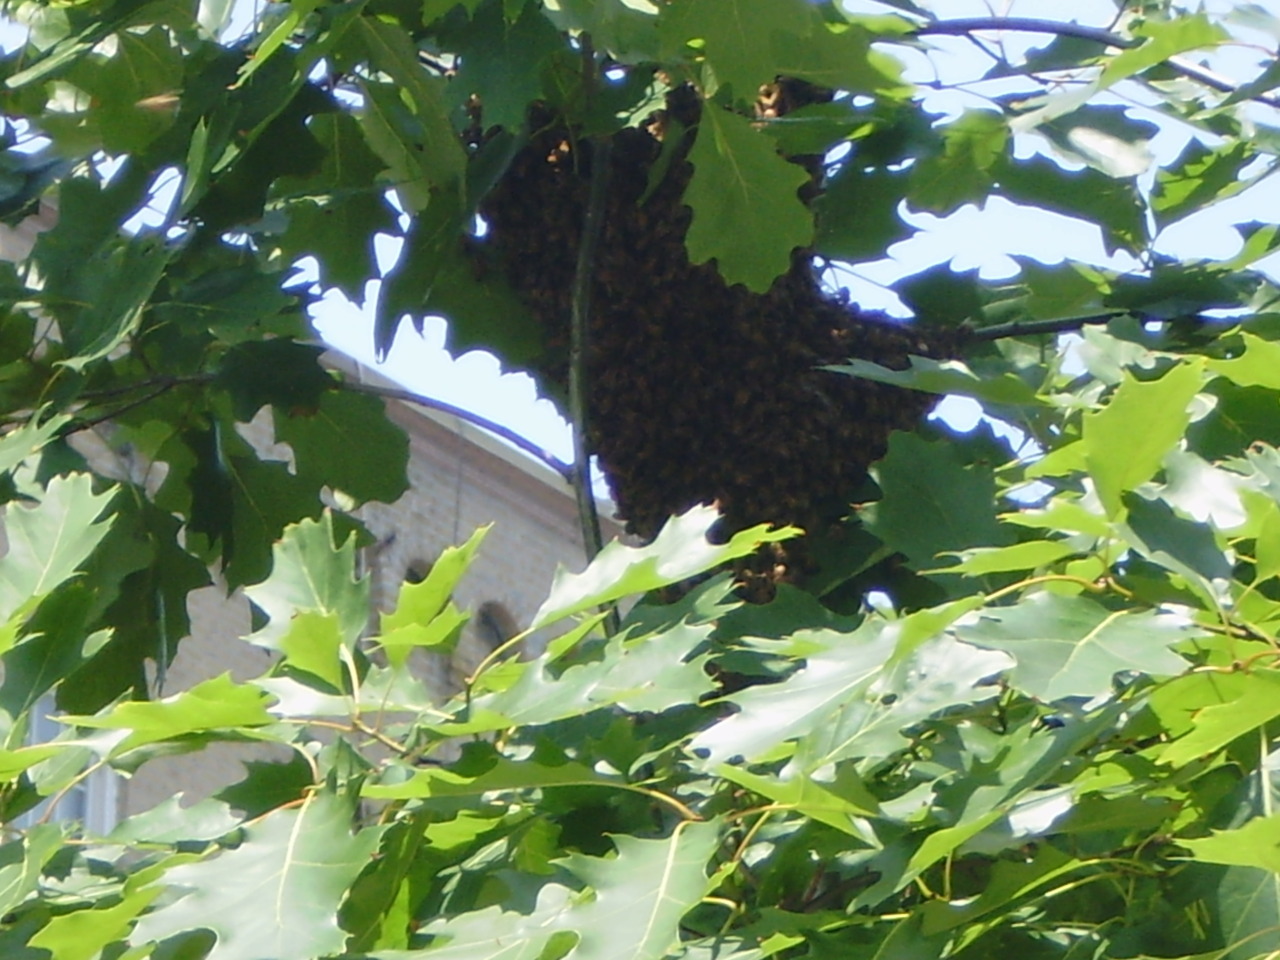 Swarm of bees today, in a tree on the corner of Fairview Ave and Broadway… around the corner from me.. In New York City